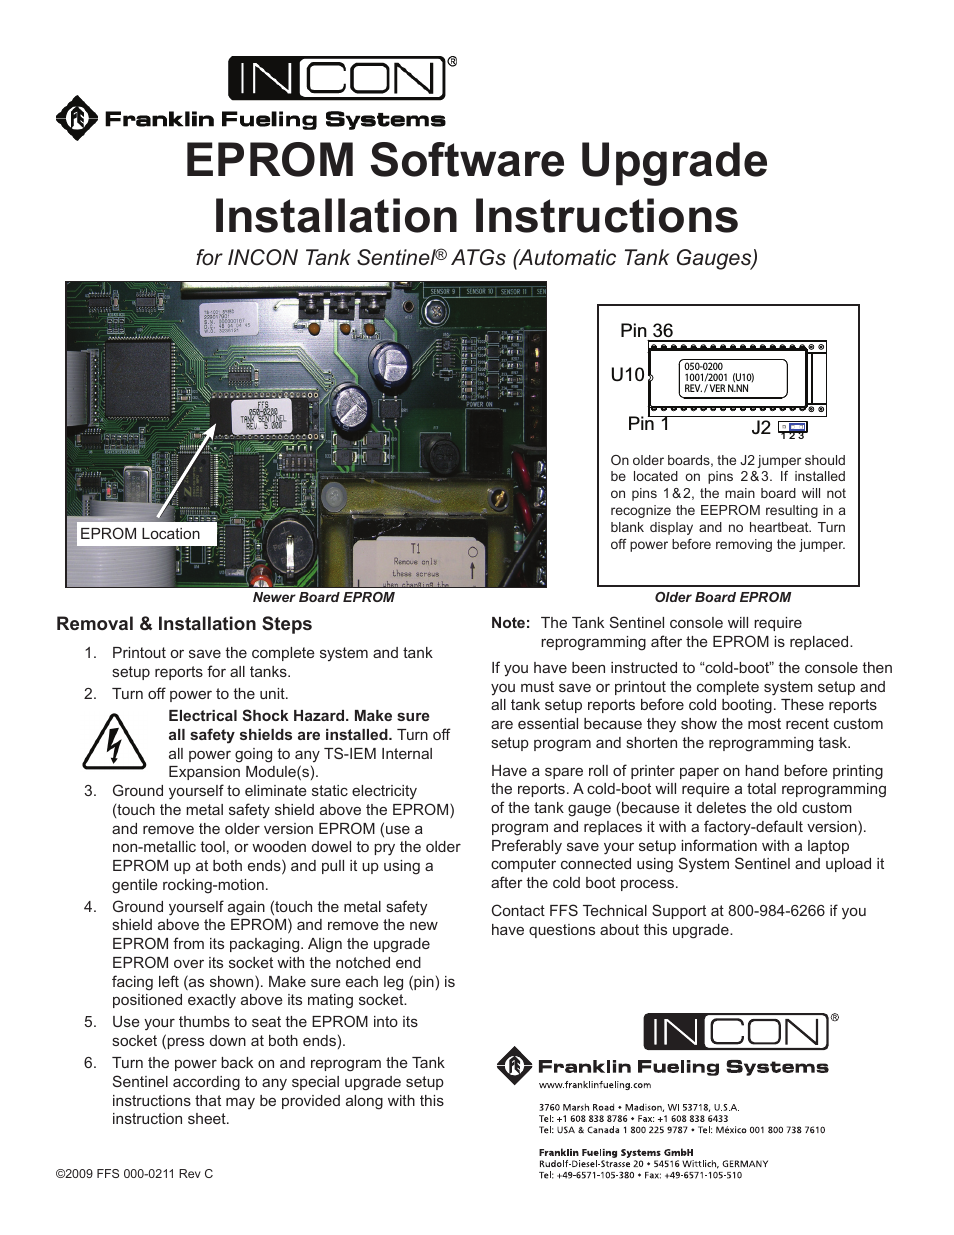 ATG EPROM replacement